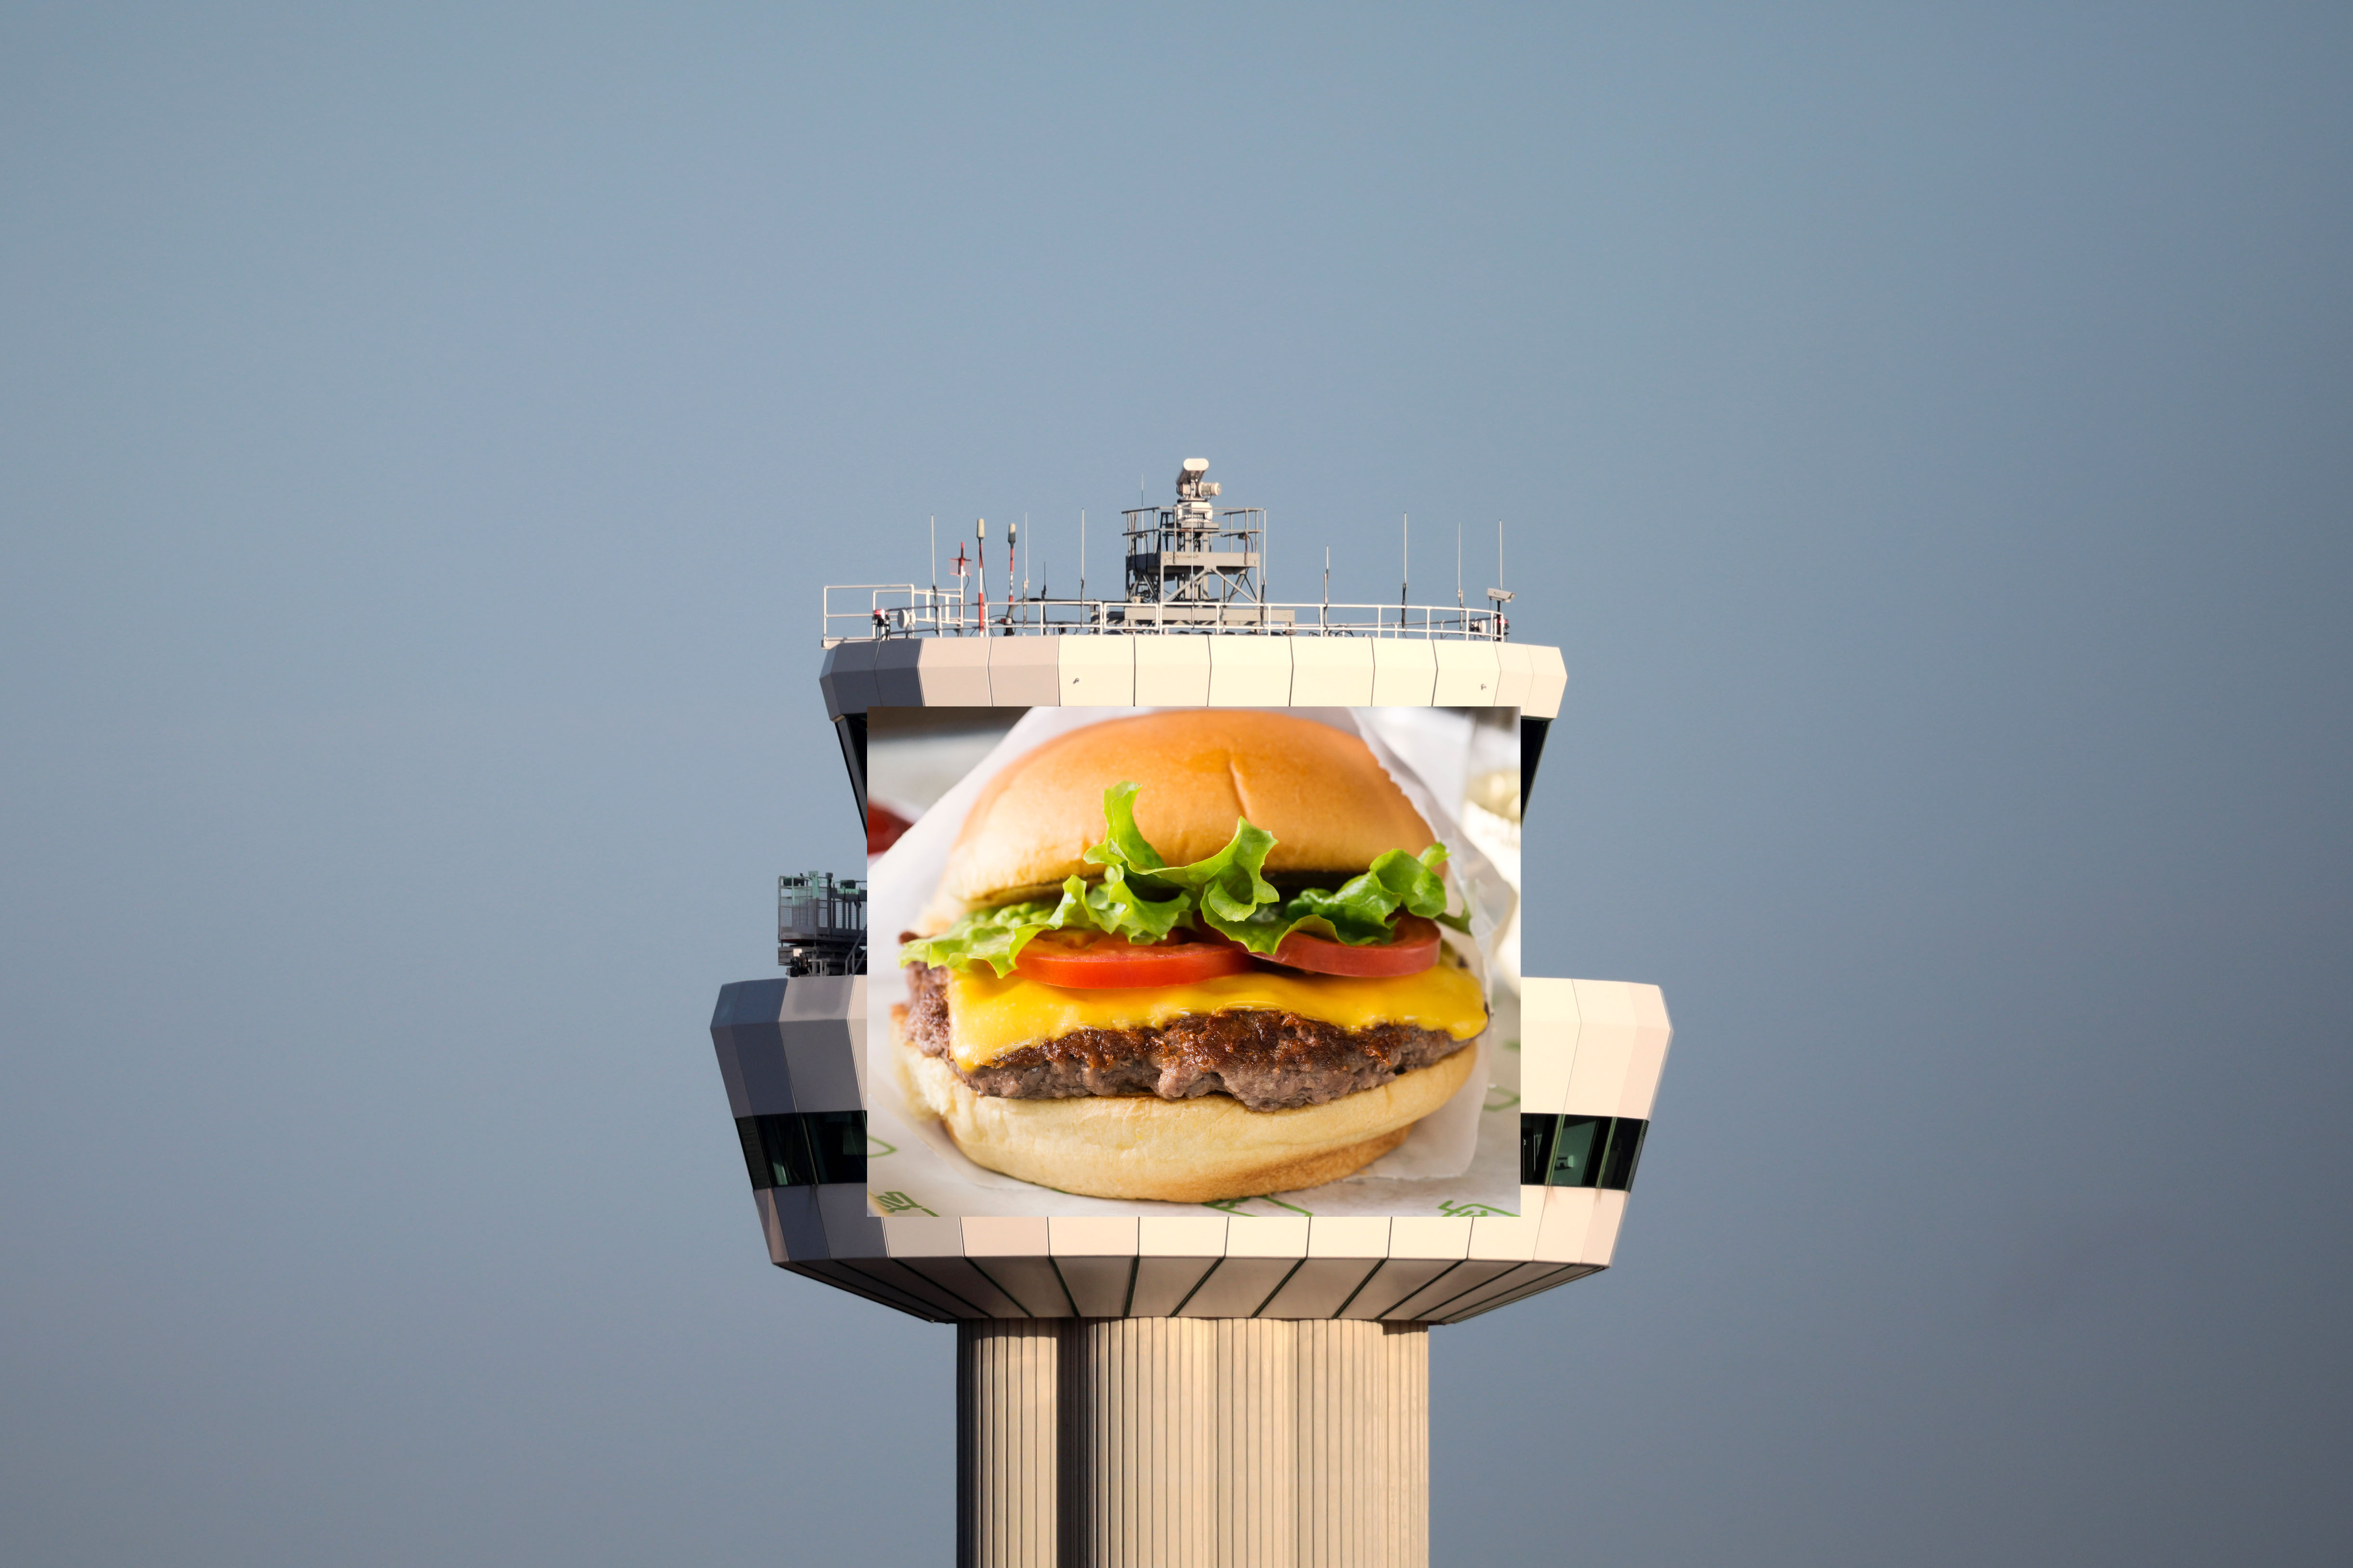 A Shake Shack logo photoshopped on to the control tower at Gatwick Airport in London